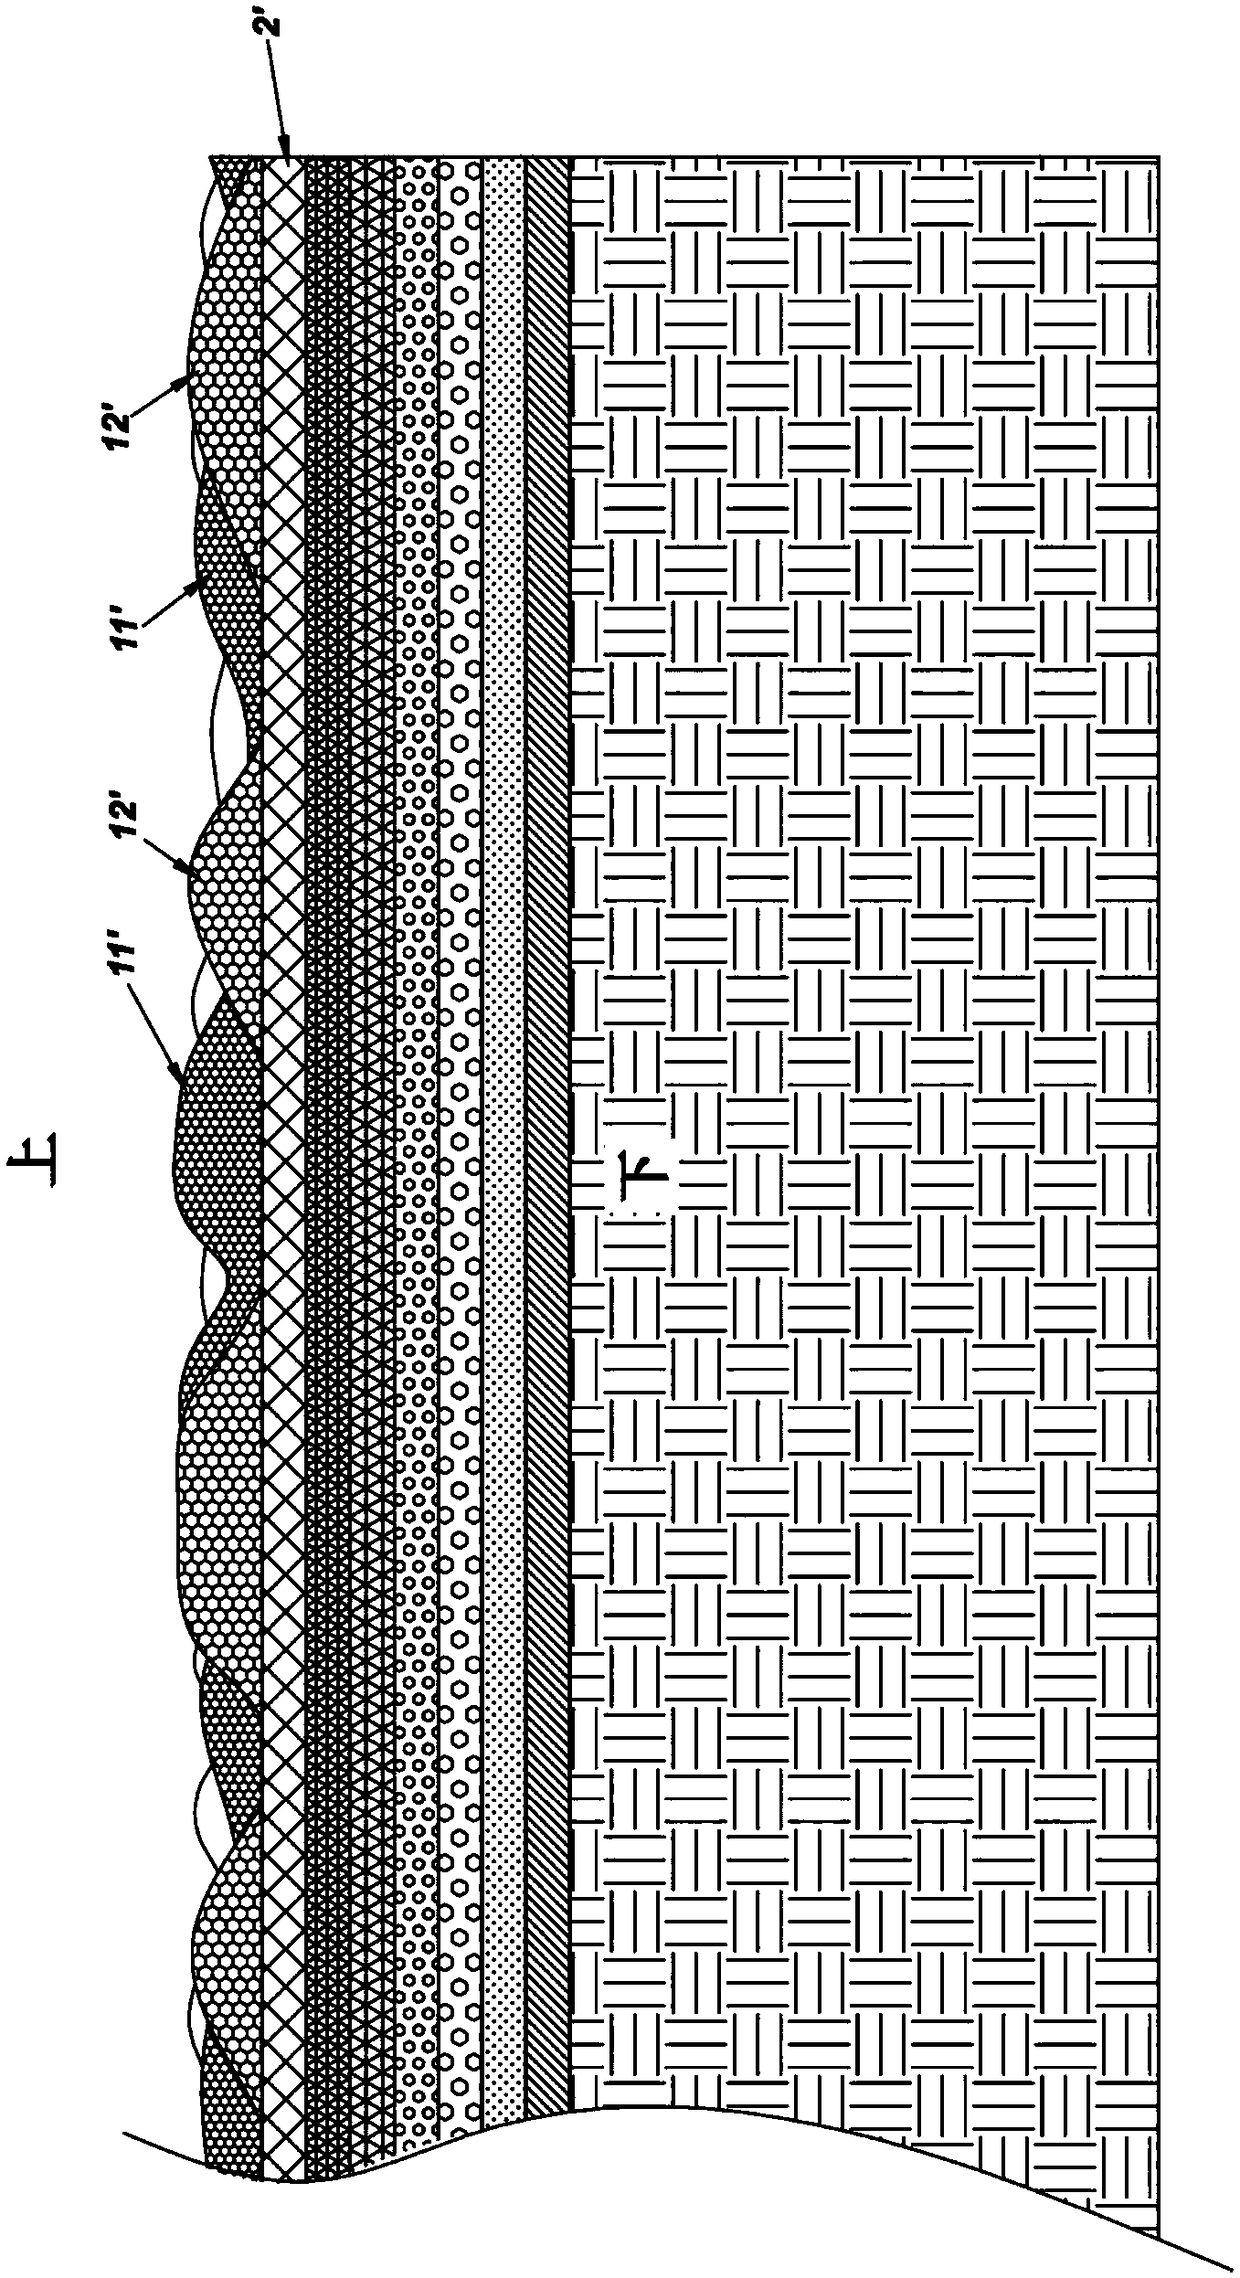 Multifunctional and environment-friendly wood-like decorative board and production method thereof